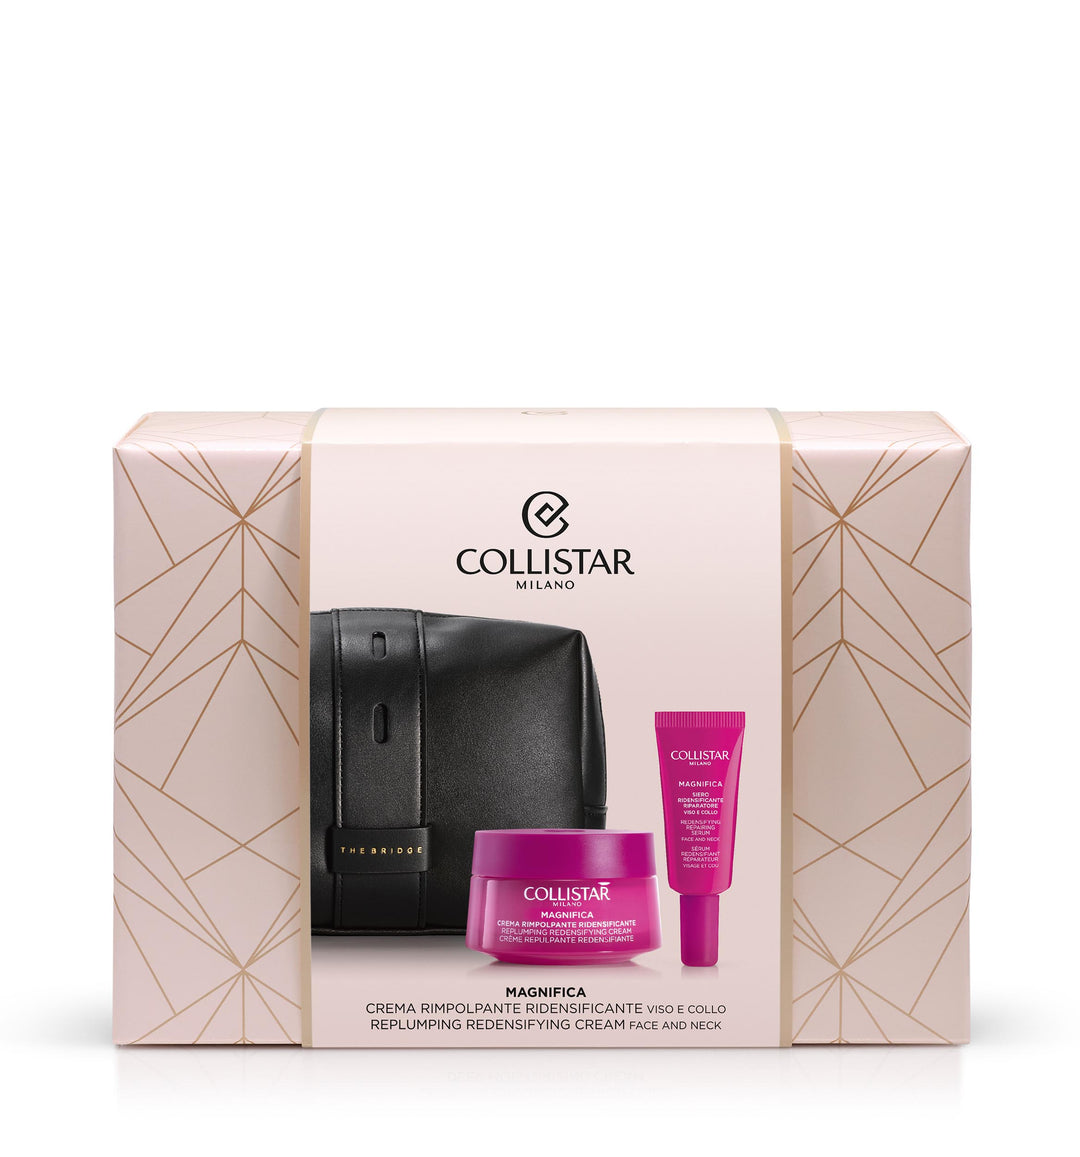 Collistar Magnificent Plumping and Redensifying Face and Neck Cream Set.